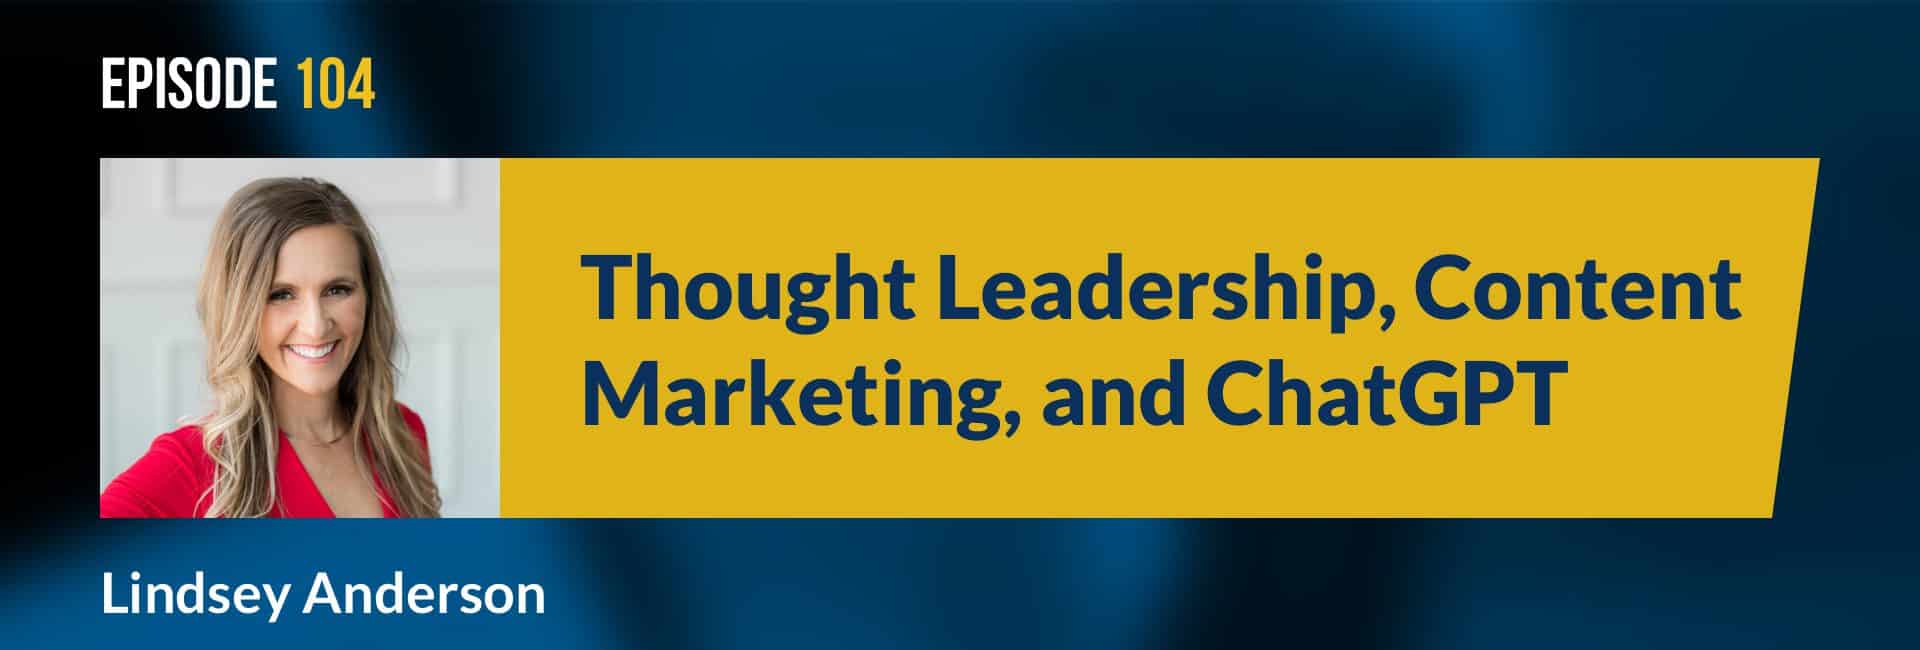 Thought Leadership, Content Marketing, and ChatGPT